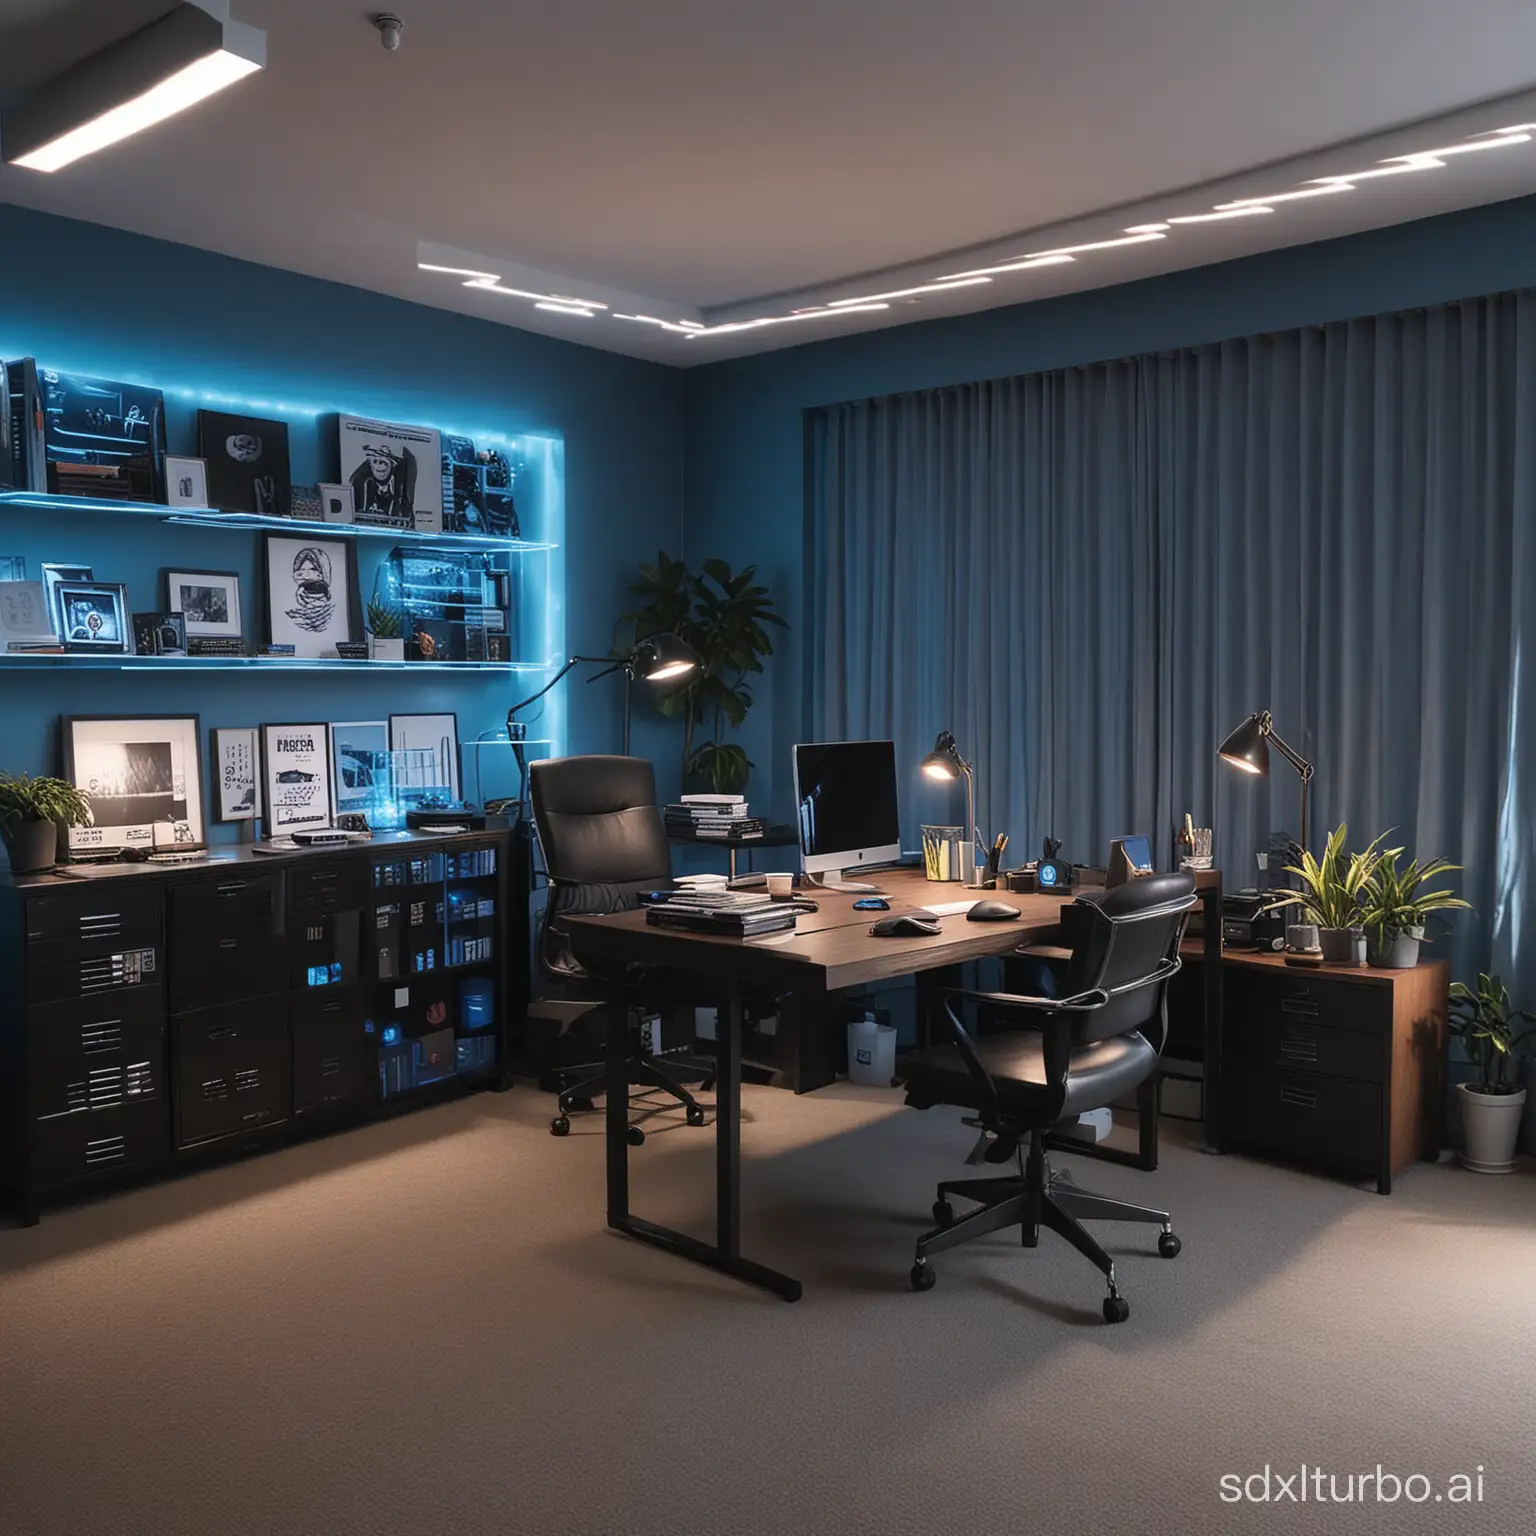 create an office backgroud with  and cool 
with blue lights, stylish, modern, movies and kdramas
